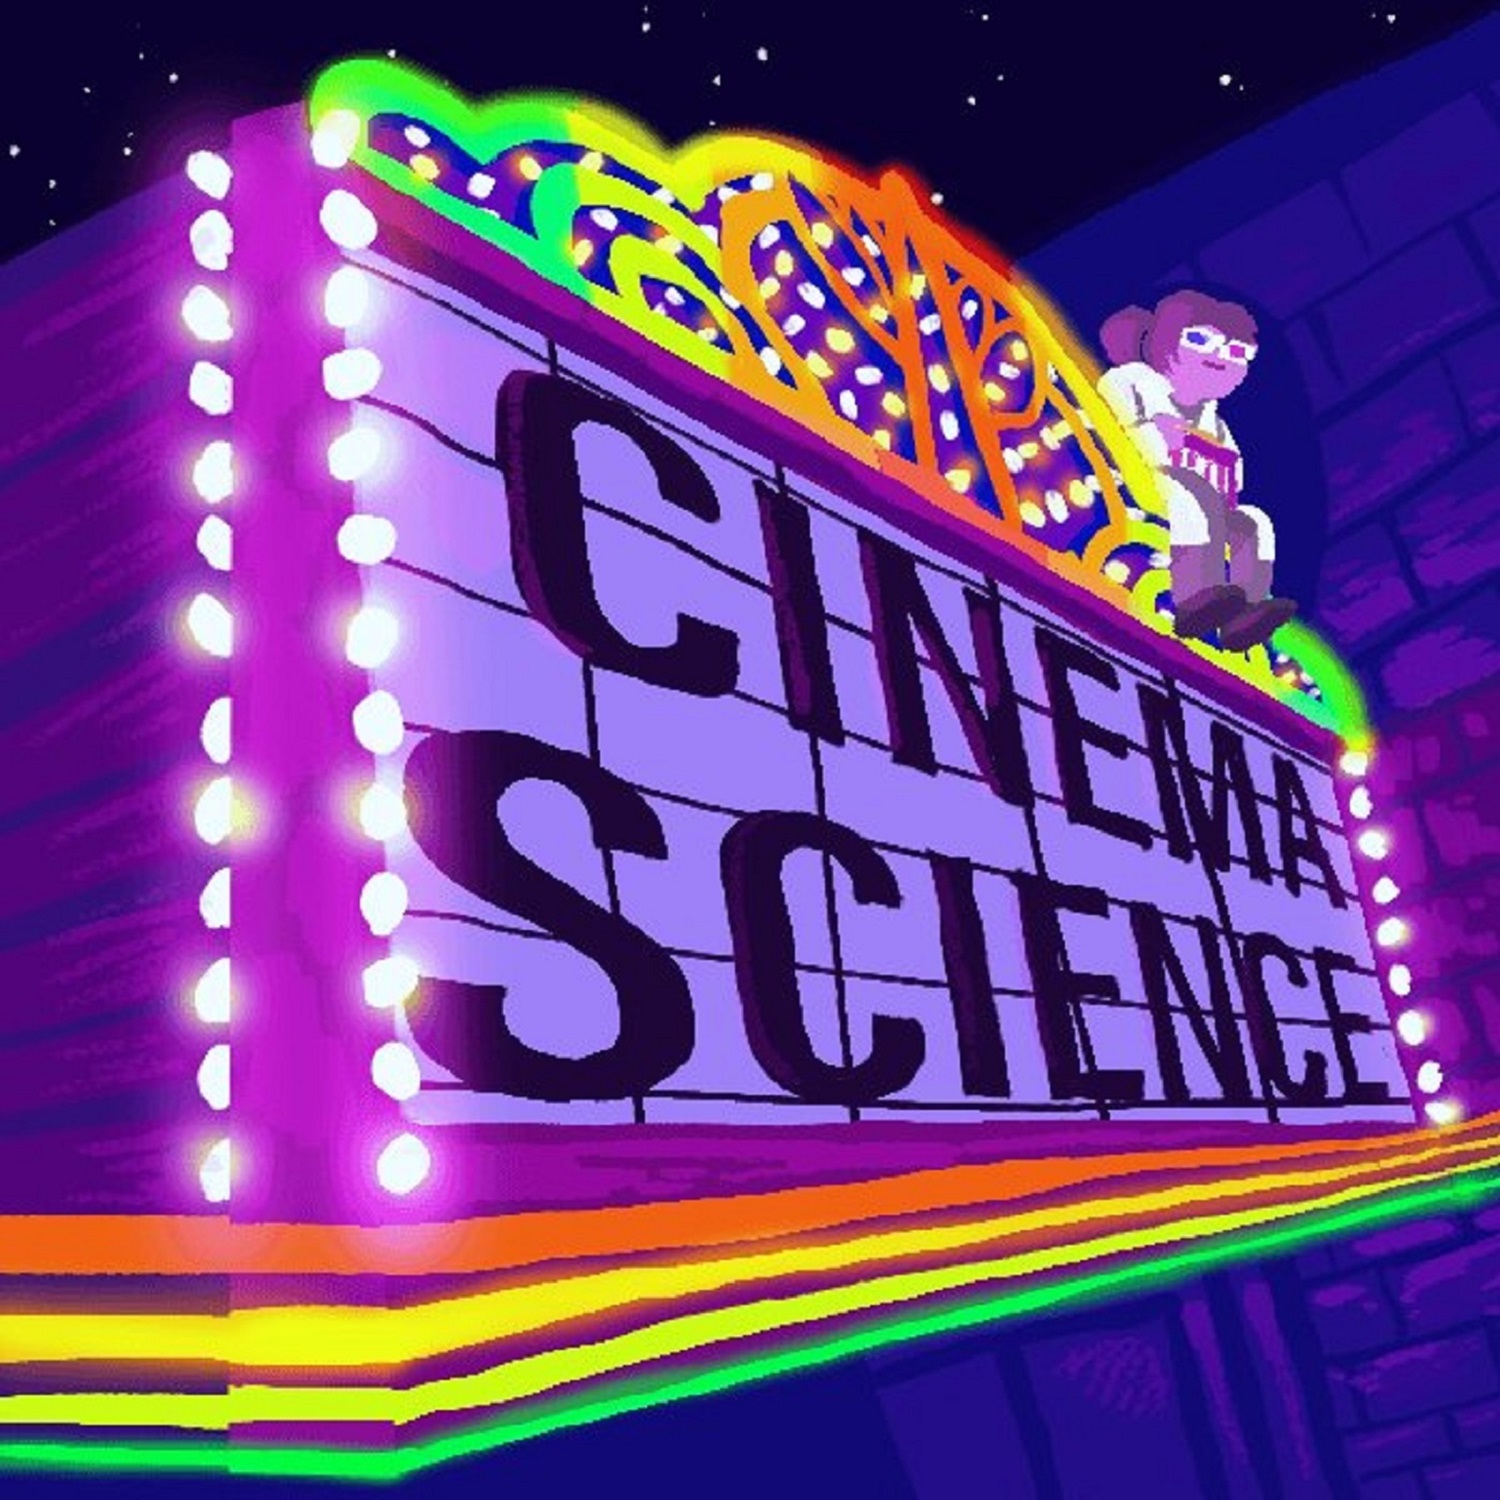 Cinema Science Podcast: Scientists Chat About Their Favorite Movies and Shows